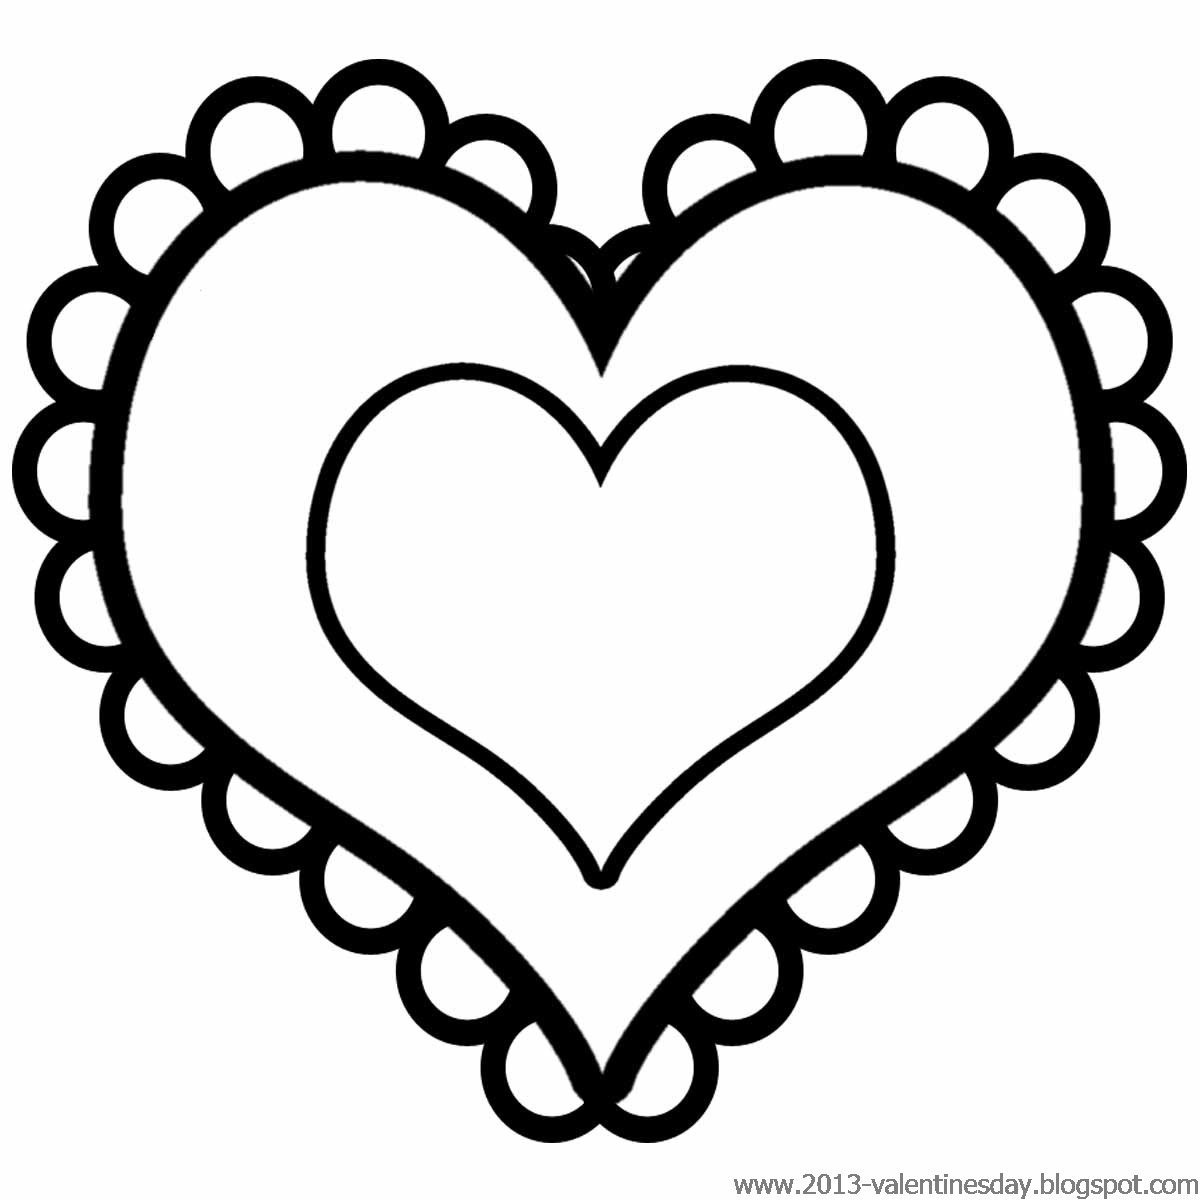 Heart Clipart Black And White - free clipart downloading - valentines day clip art free download, valentine candy hearts clip art, silver heart clipart, sacred heart of jesus clipart, paw heart clipart, music heart clip art, helping hands caring hearts clip art, hearts and flowers clipart, heart pizza clipart, heart pink clipart, heart images clip art, heart heart clip art, heart filigree clip art, heart emoji clipart, heart arrow clip art, hands making a heart clipart, flaming heart clipart, decorative heart clipart, candy cane heart clipart, baseball heart clipart